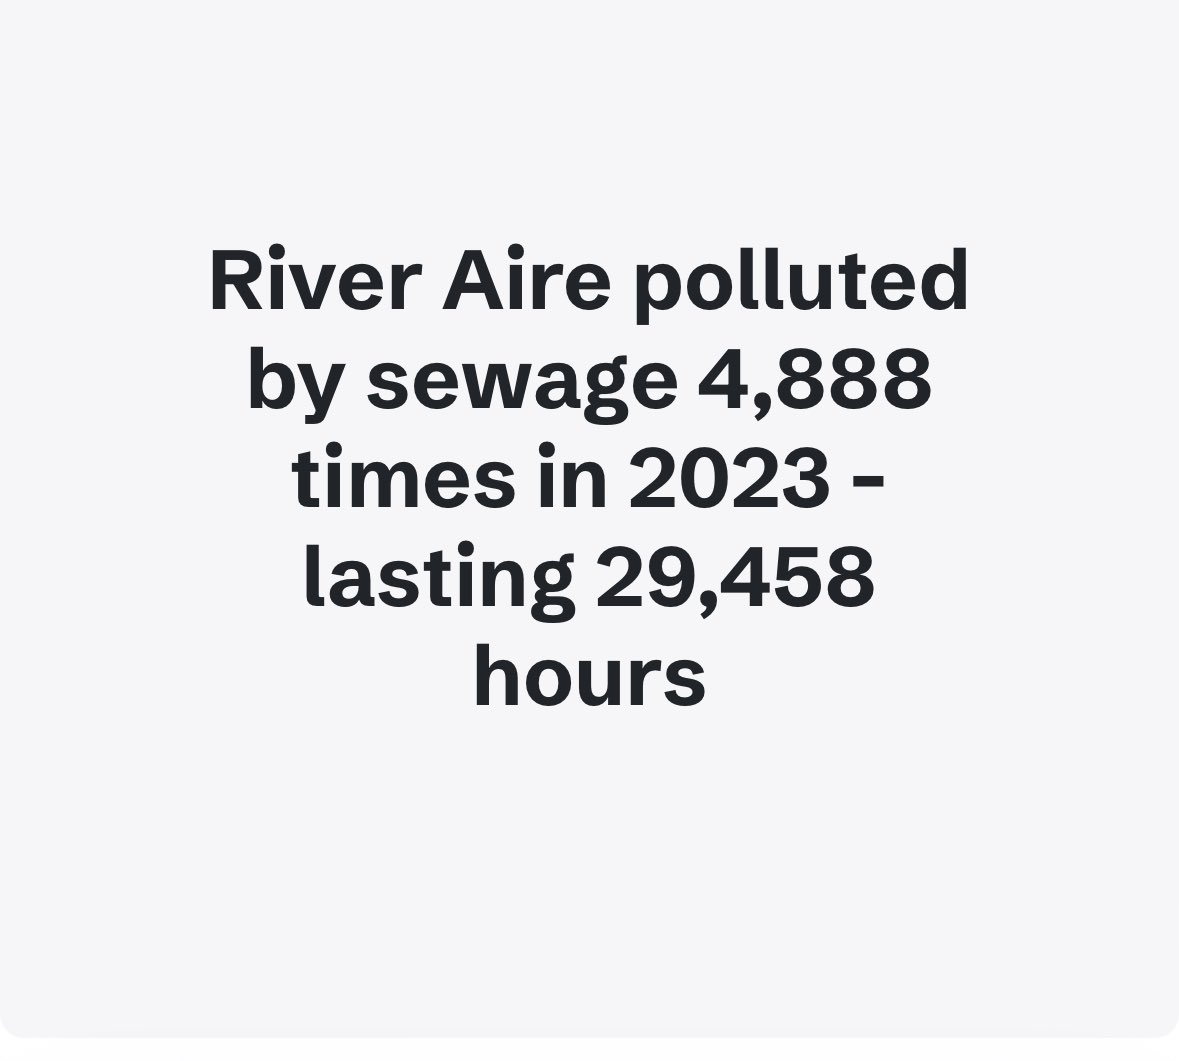 We are so fortunate to have the beautiful River Aire skirting our community at #Calverley and #Rodley. Living at Calverley Bridge means it’s on my doorstep and I love walking along it with my wife and son. However, the River Aire is one of the most dumped in, in the country.